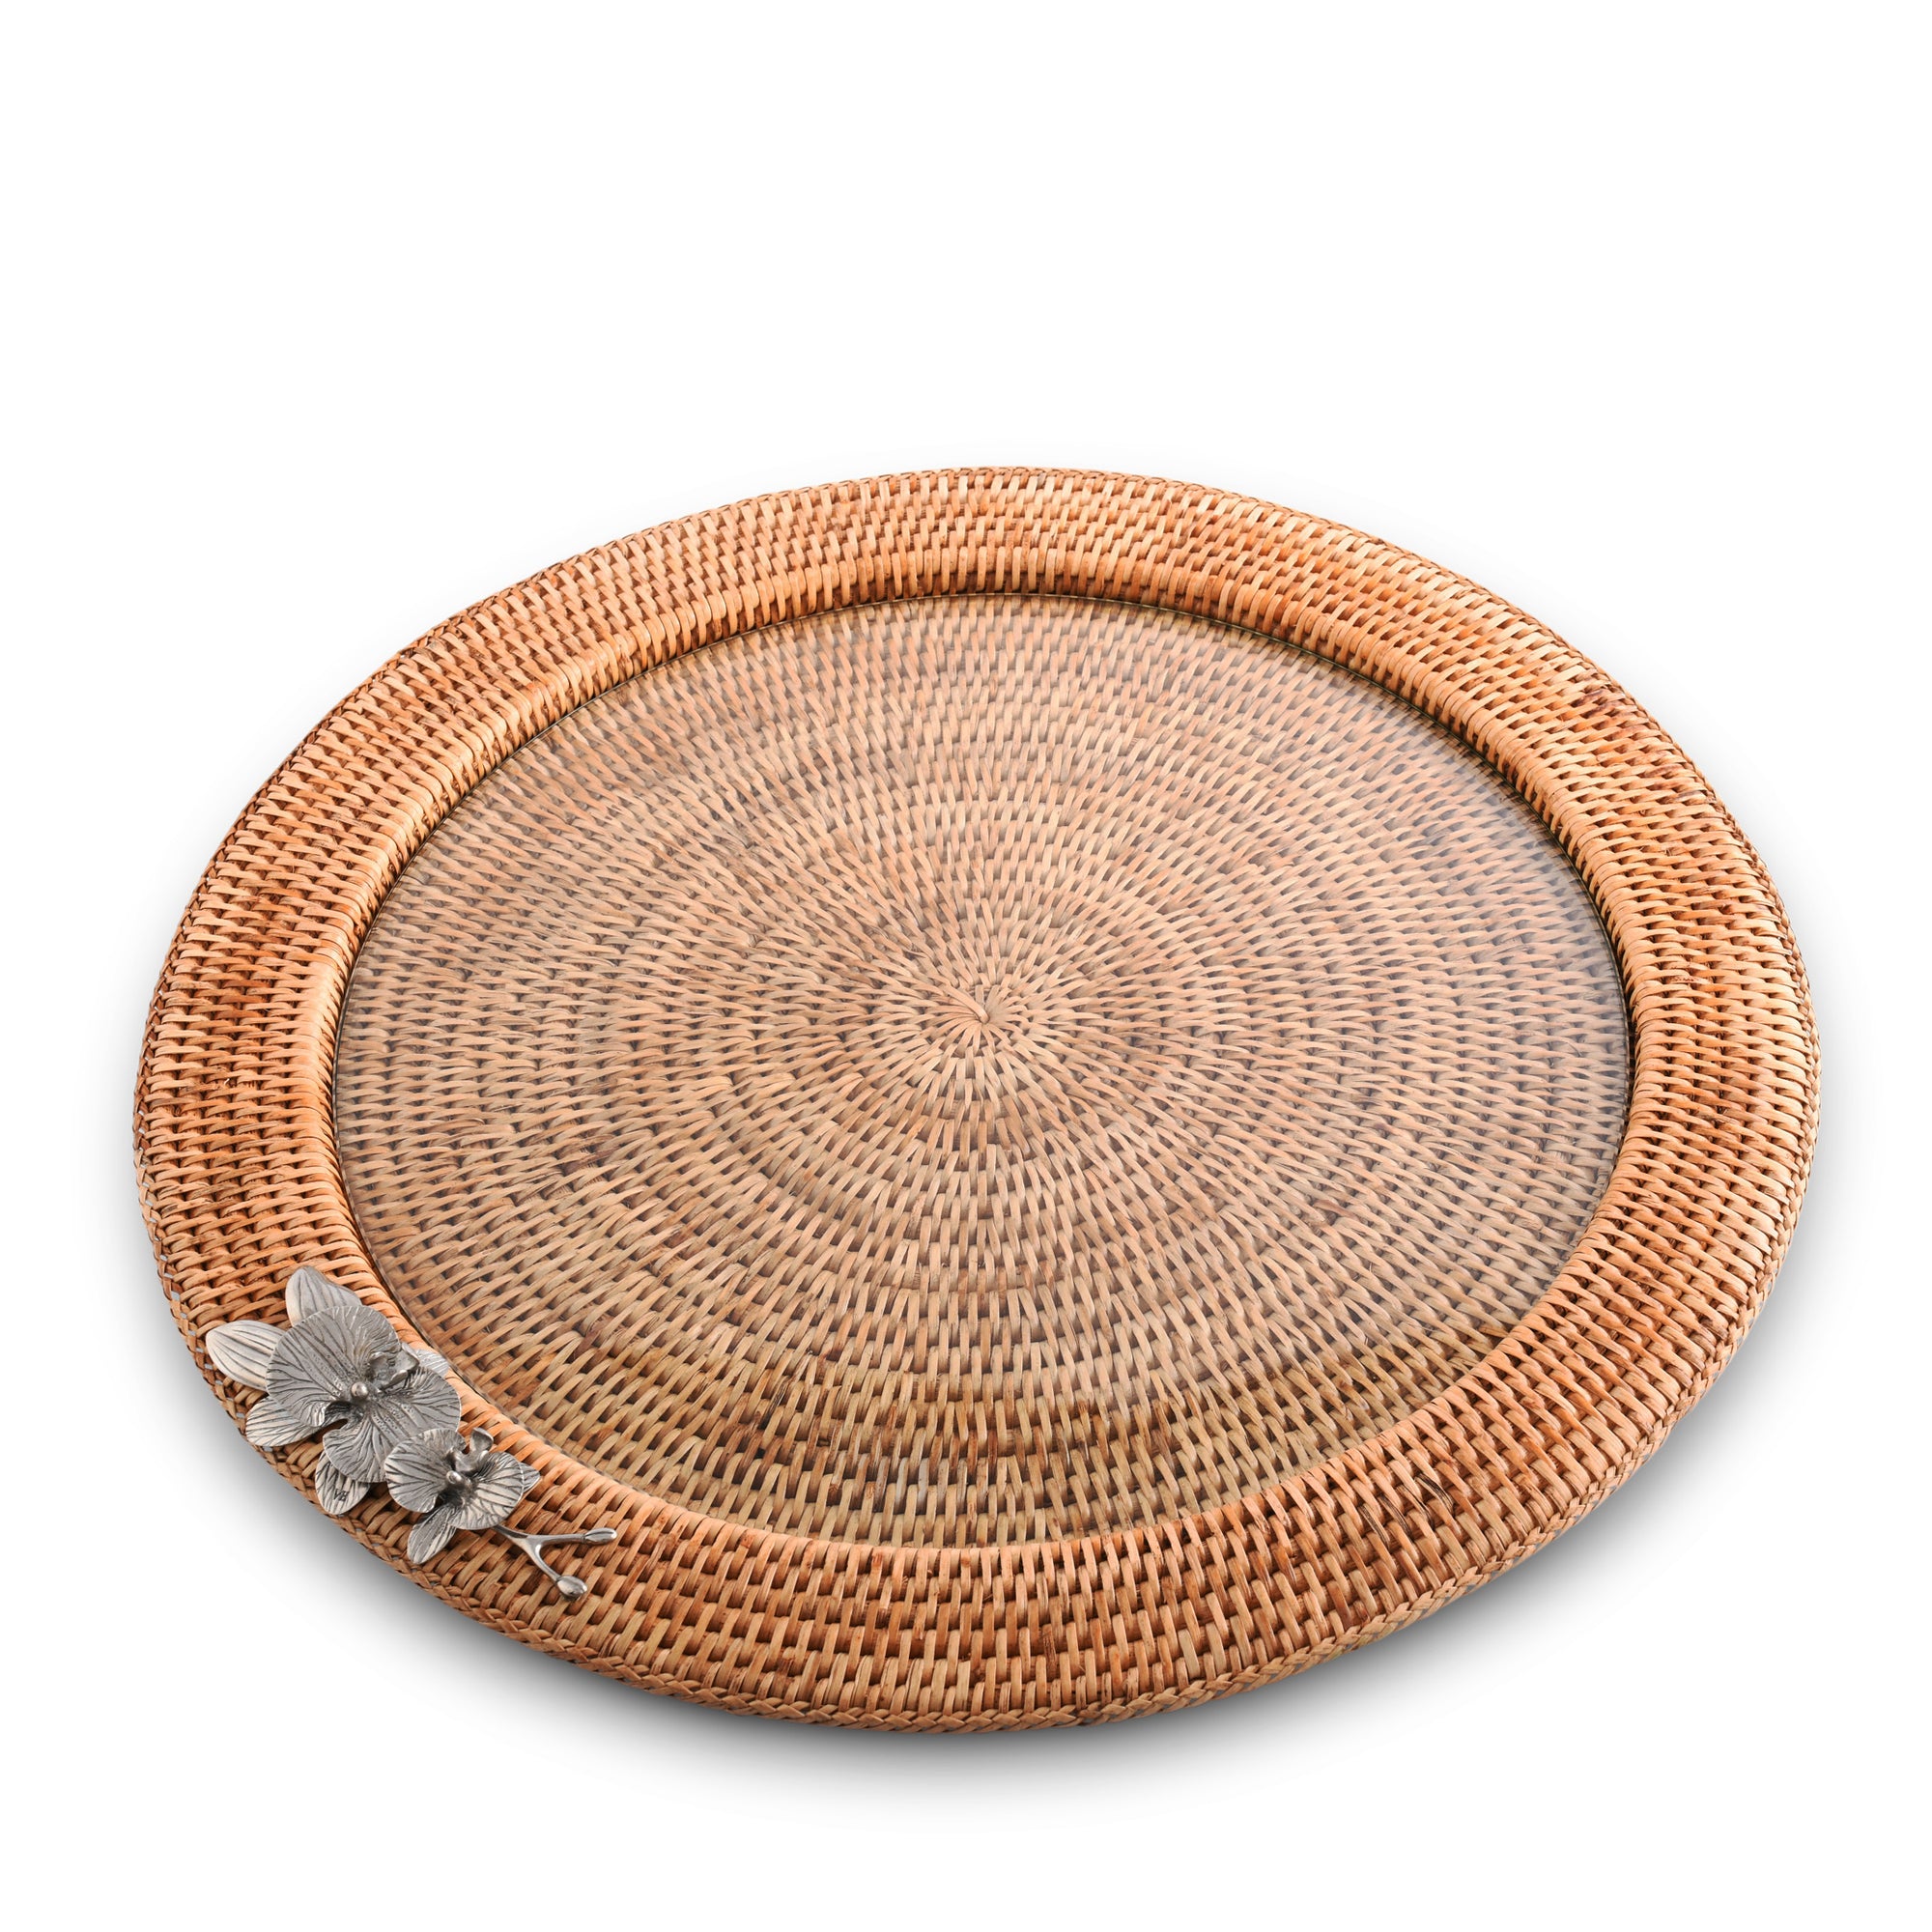 Vagabond House Orchid Round Serving Tray Hand Woven Wicker Rattan - Glass Insert Product Image